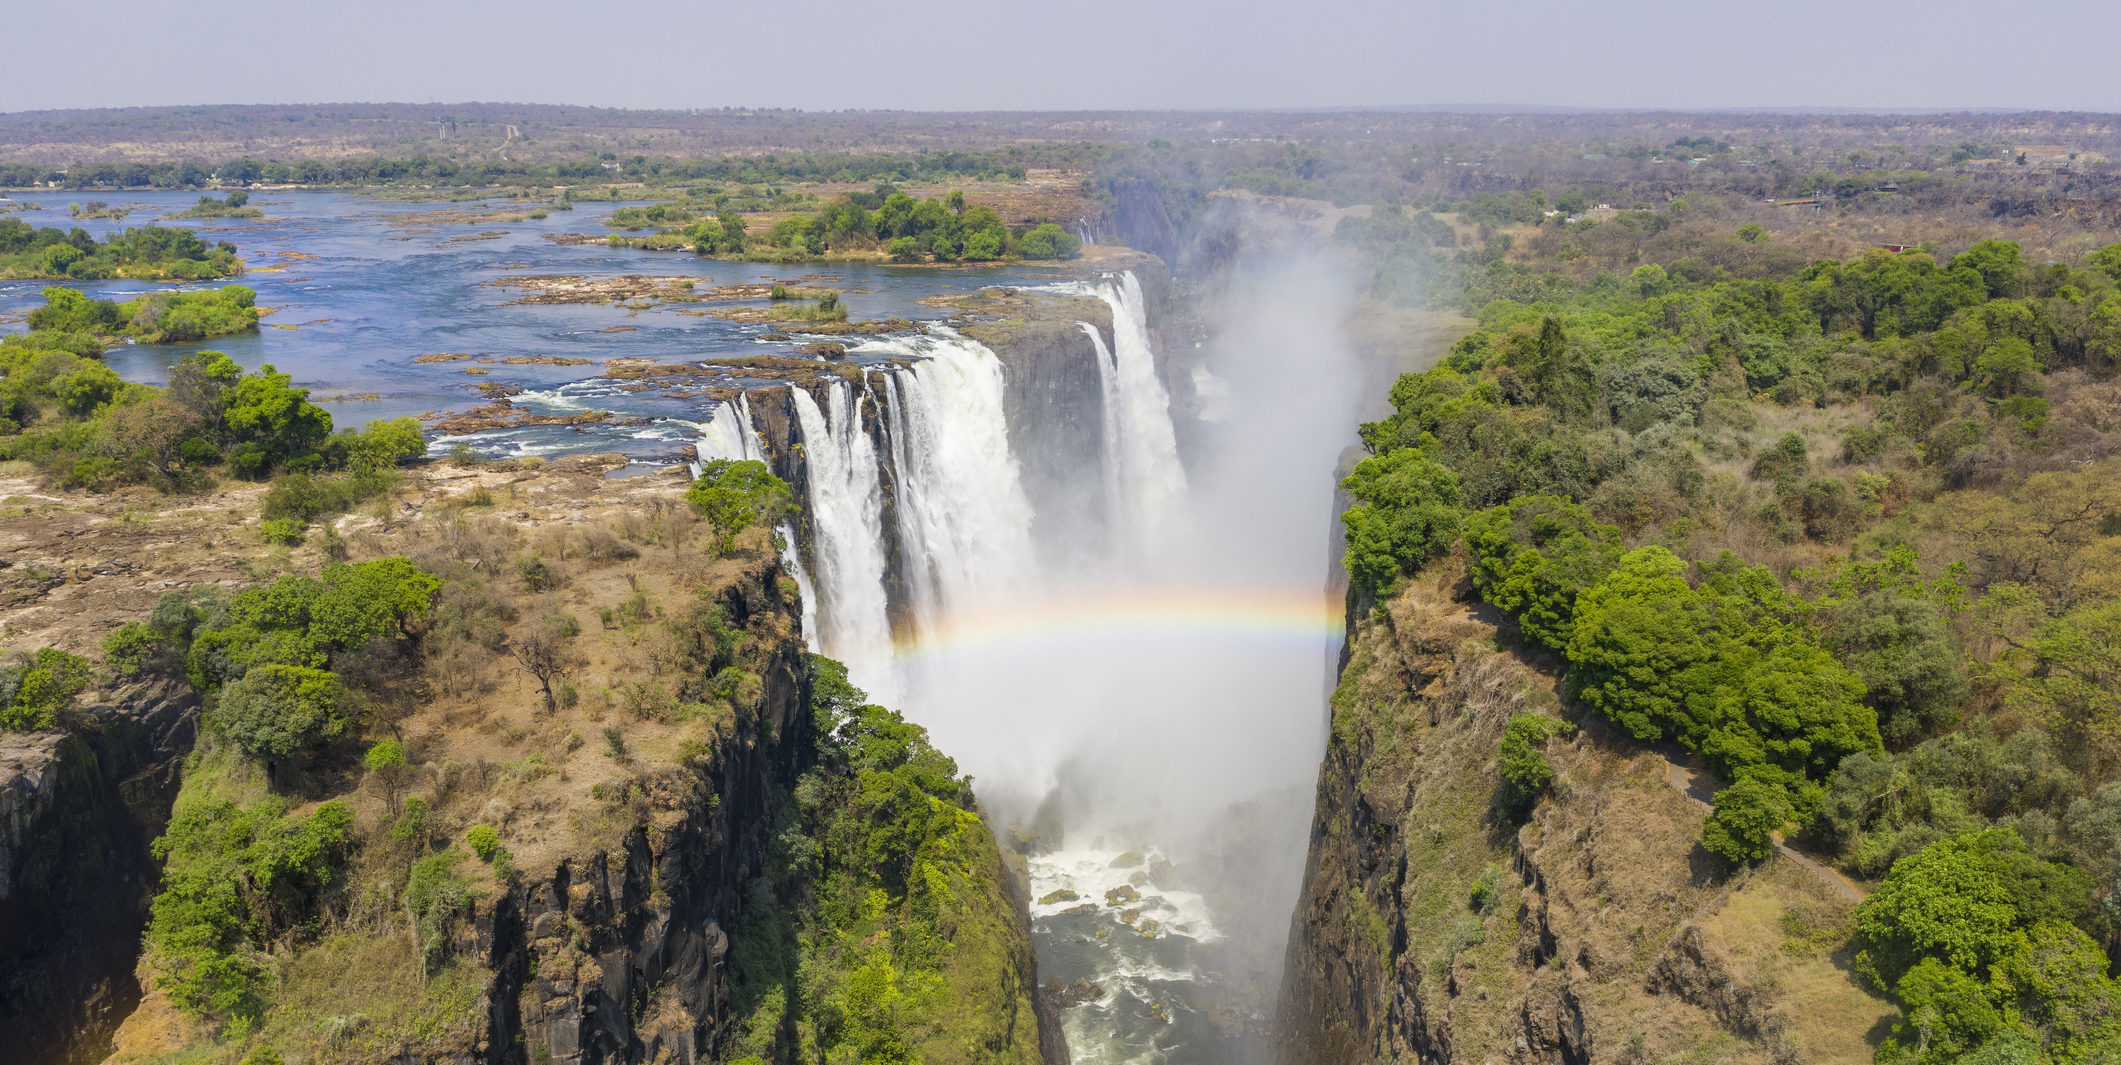 Experience extraordinary Zimbabwe landscape like these thundering cataracts in Victoria Falls when you take a tailor-made holiday with Alfred&.